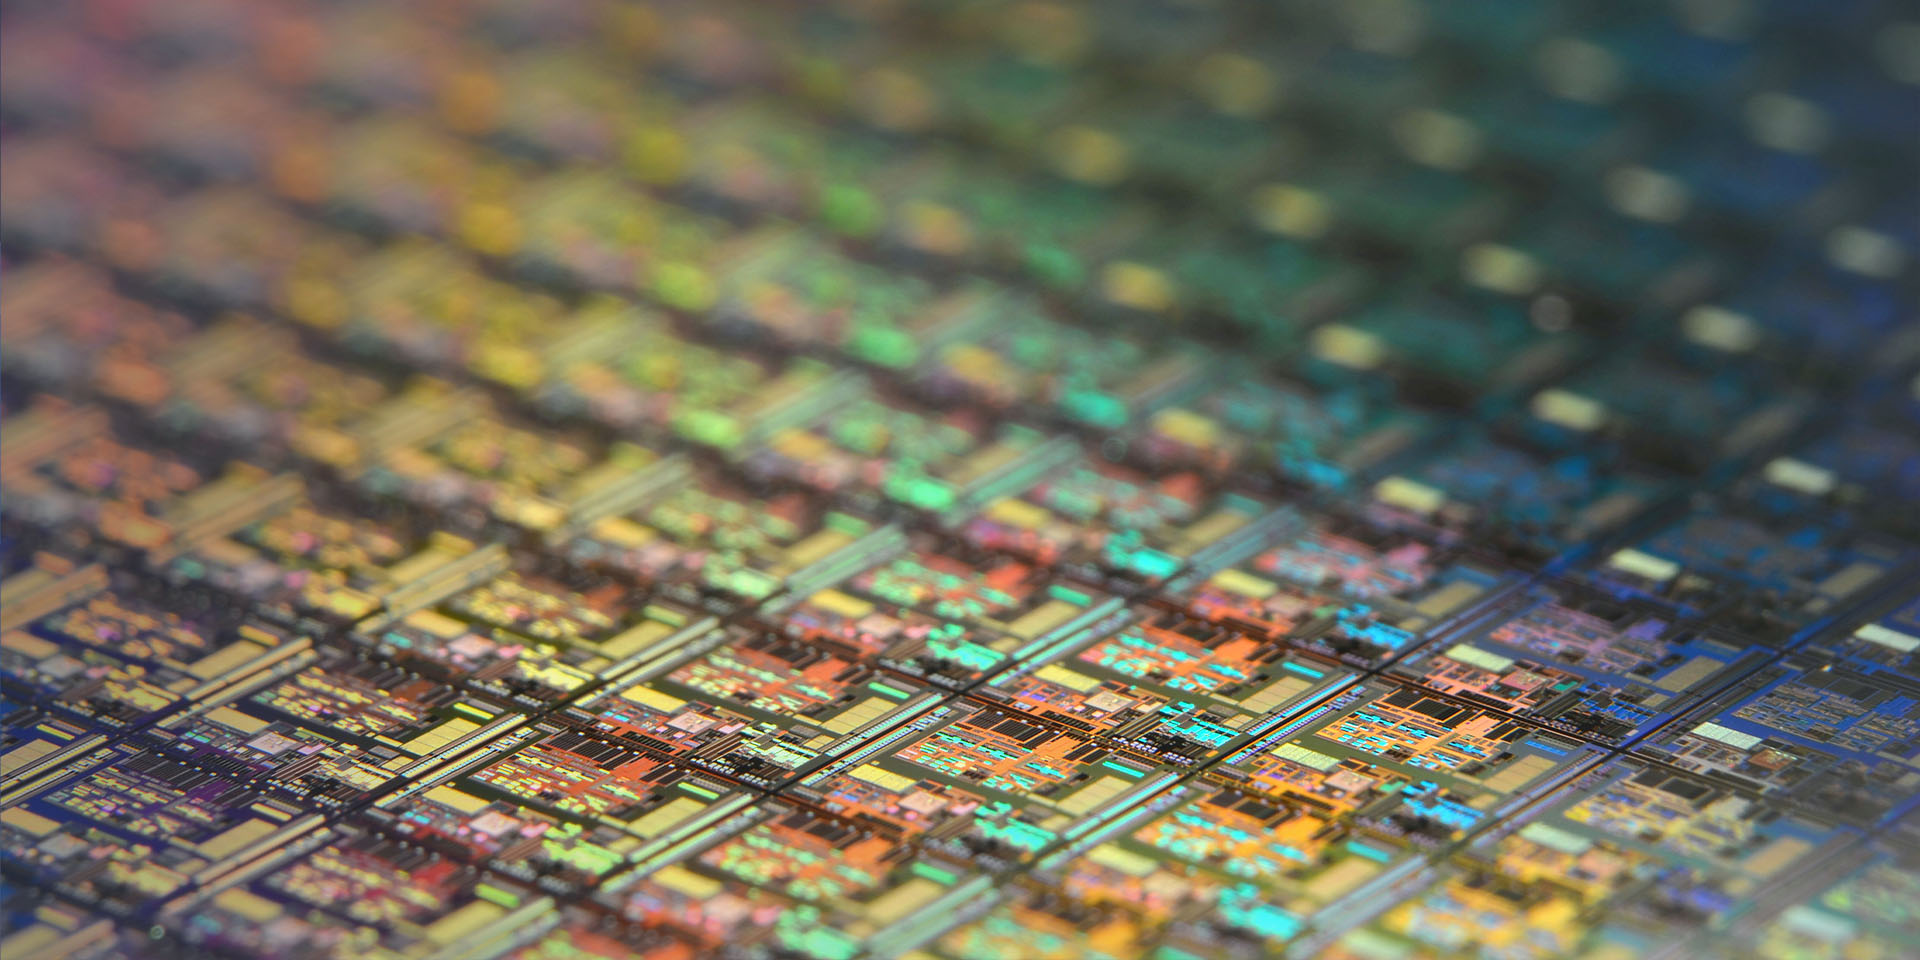 What are semiconductors?